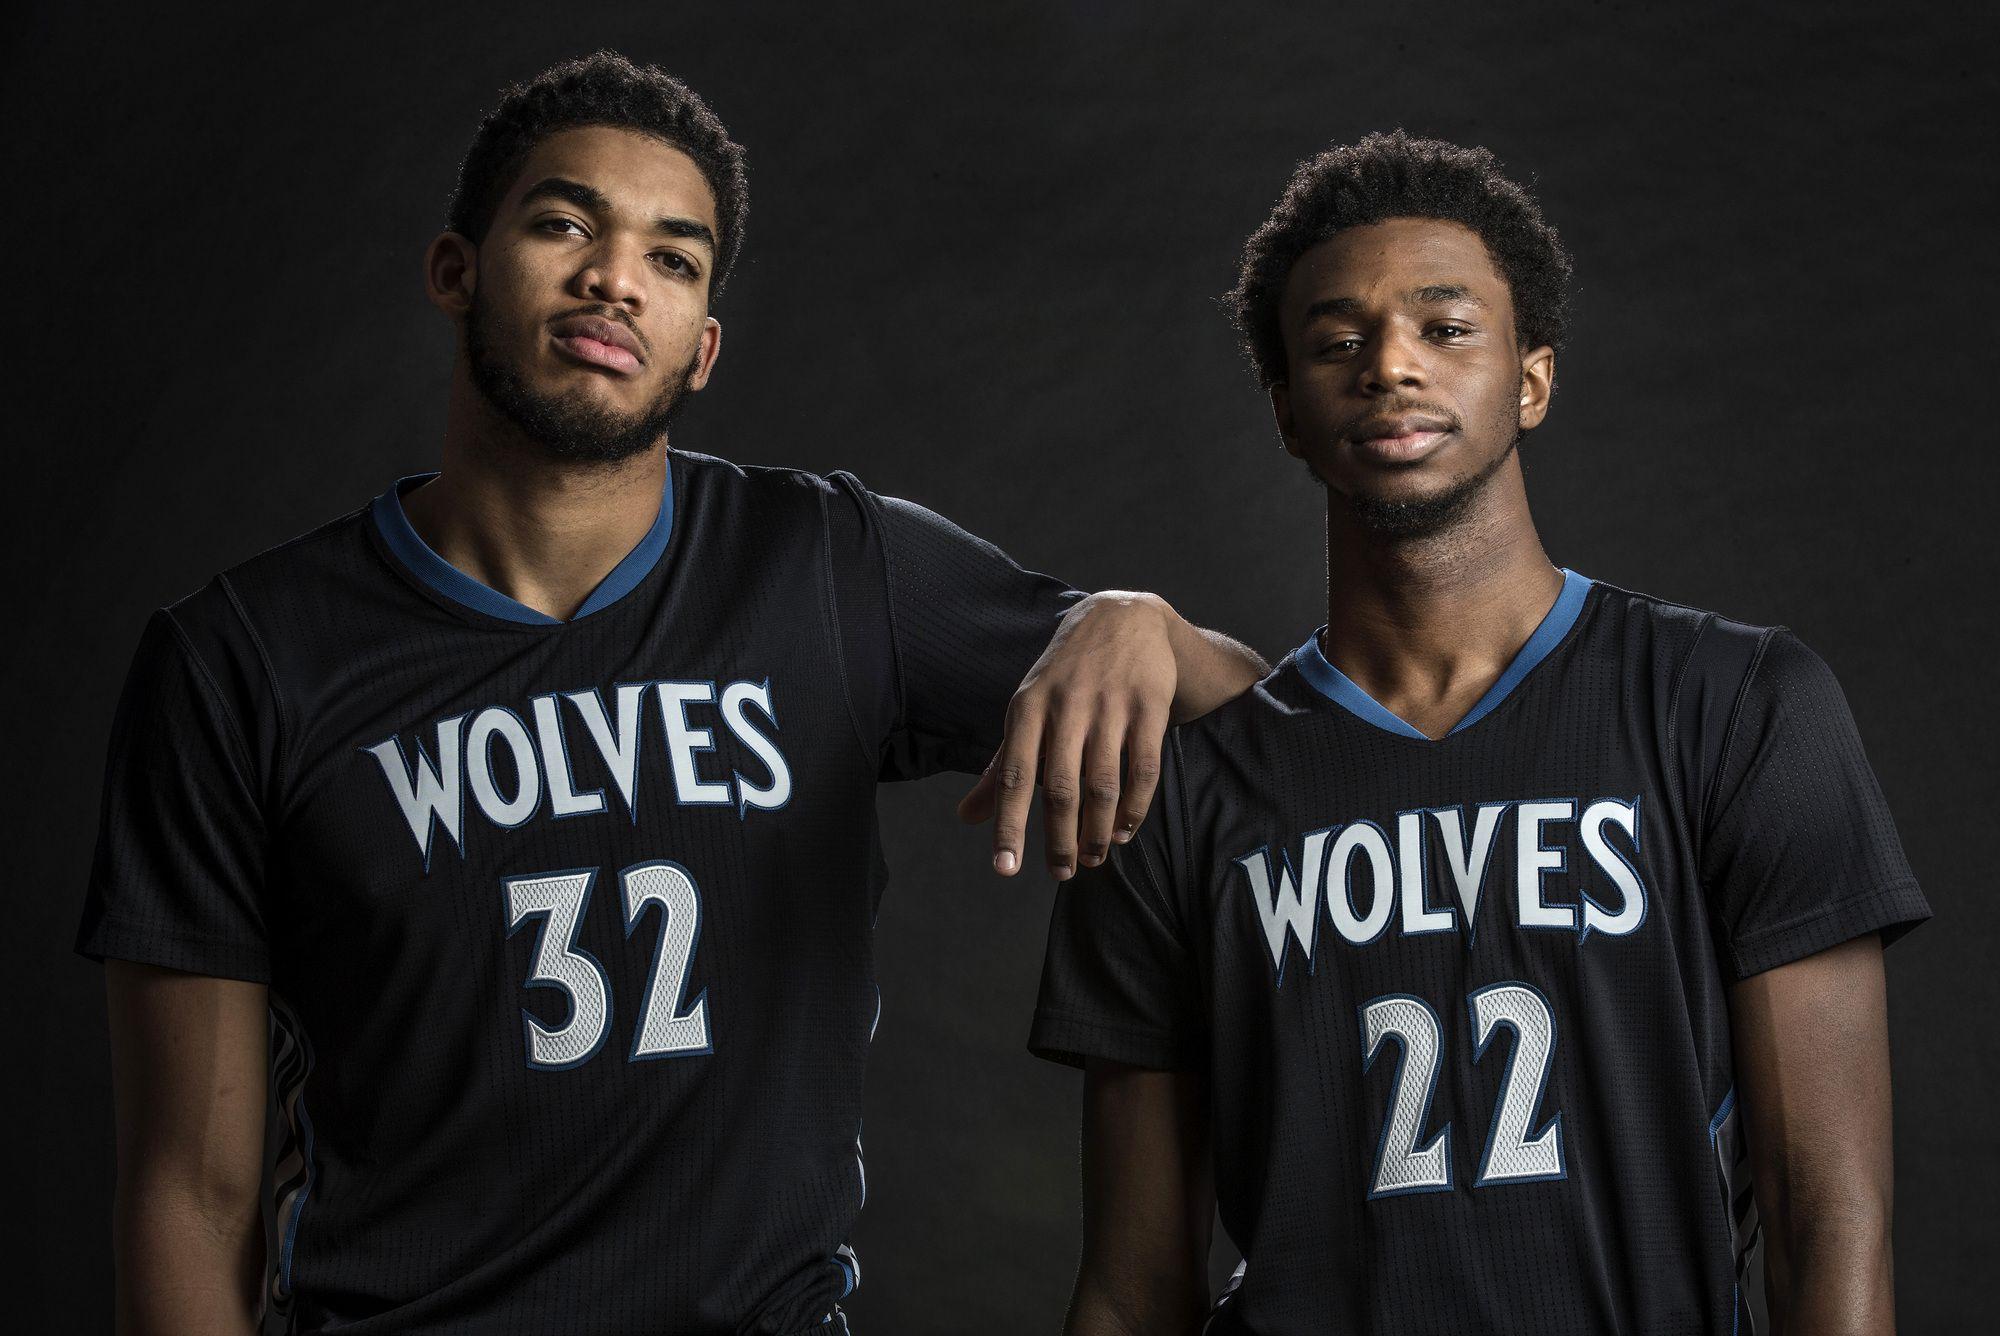 The Perfect Storm: Karl Anthony Towns